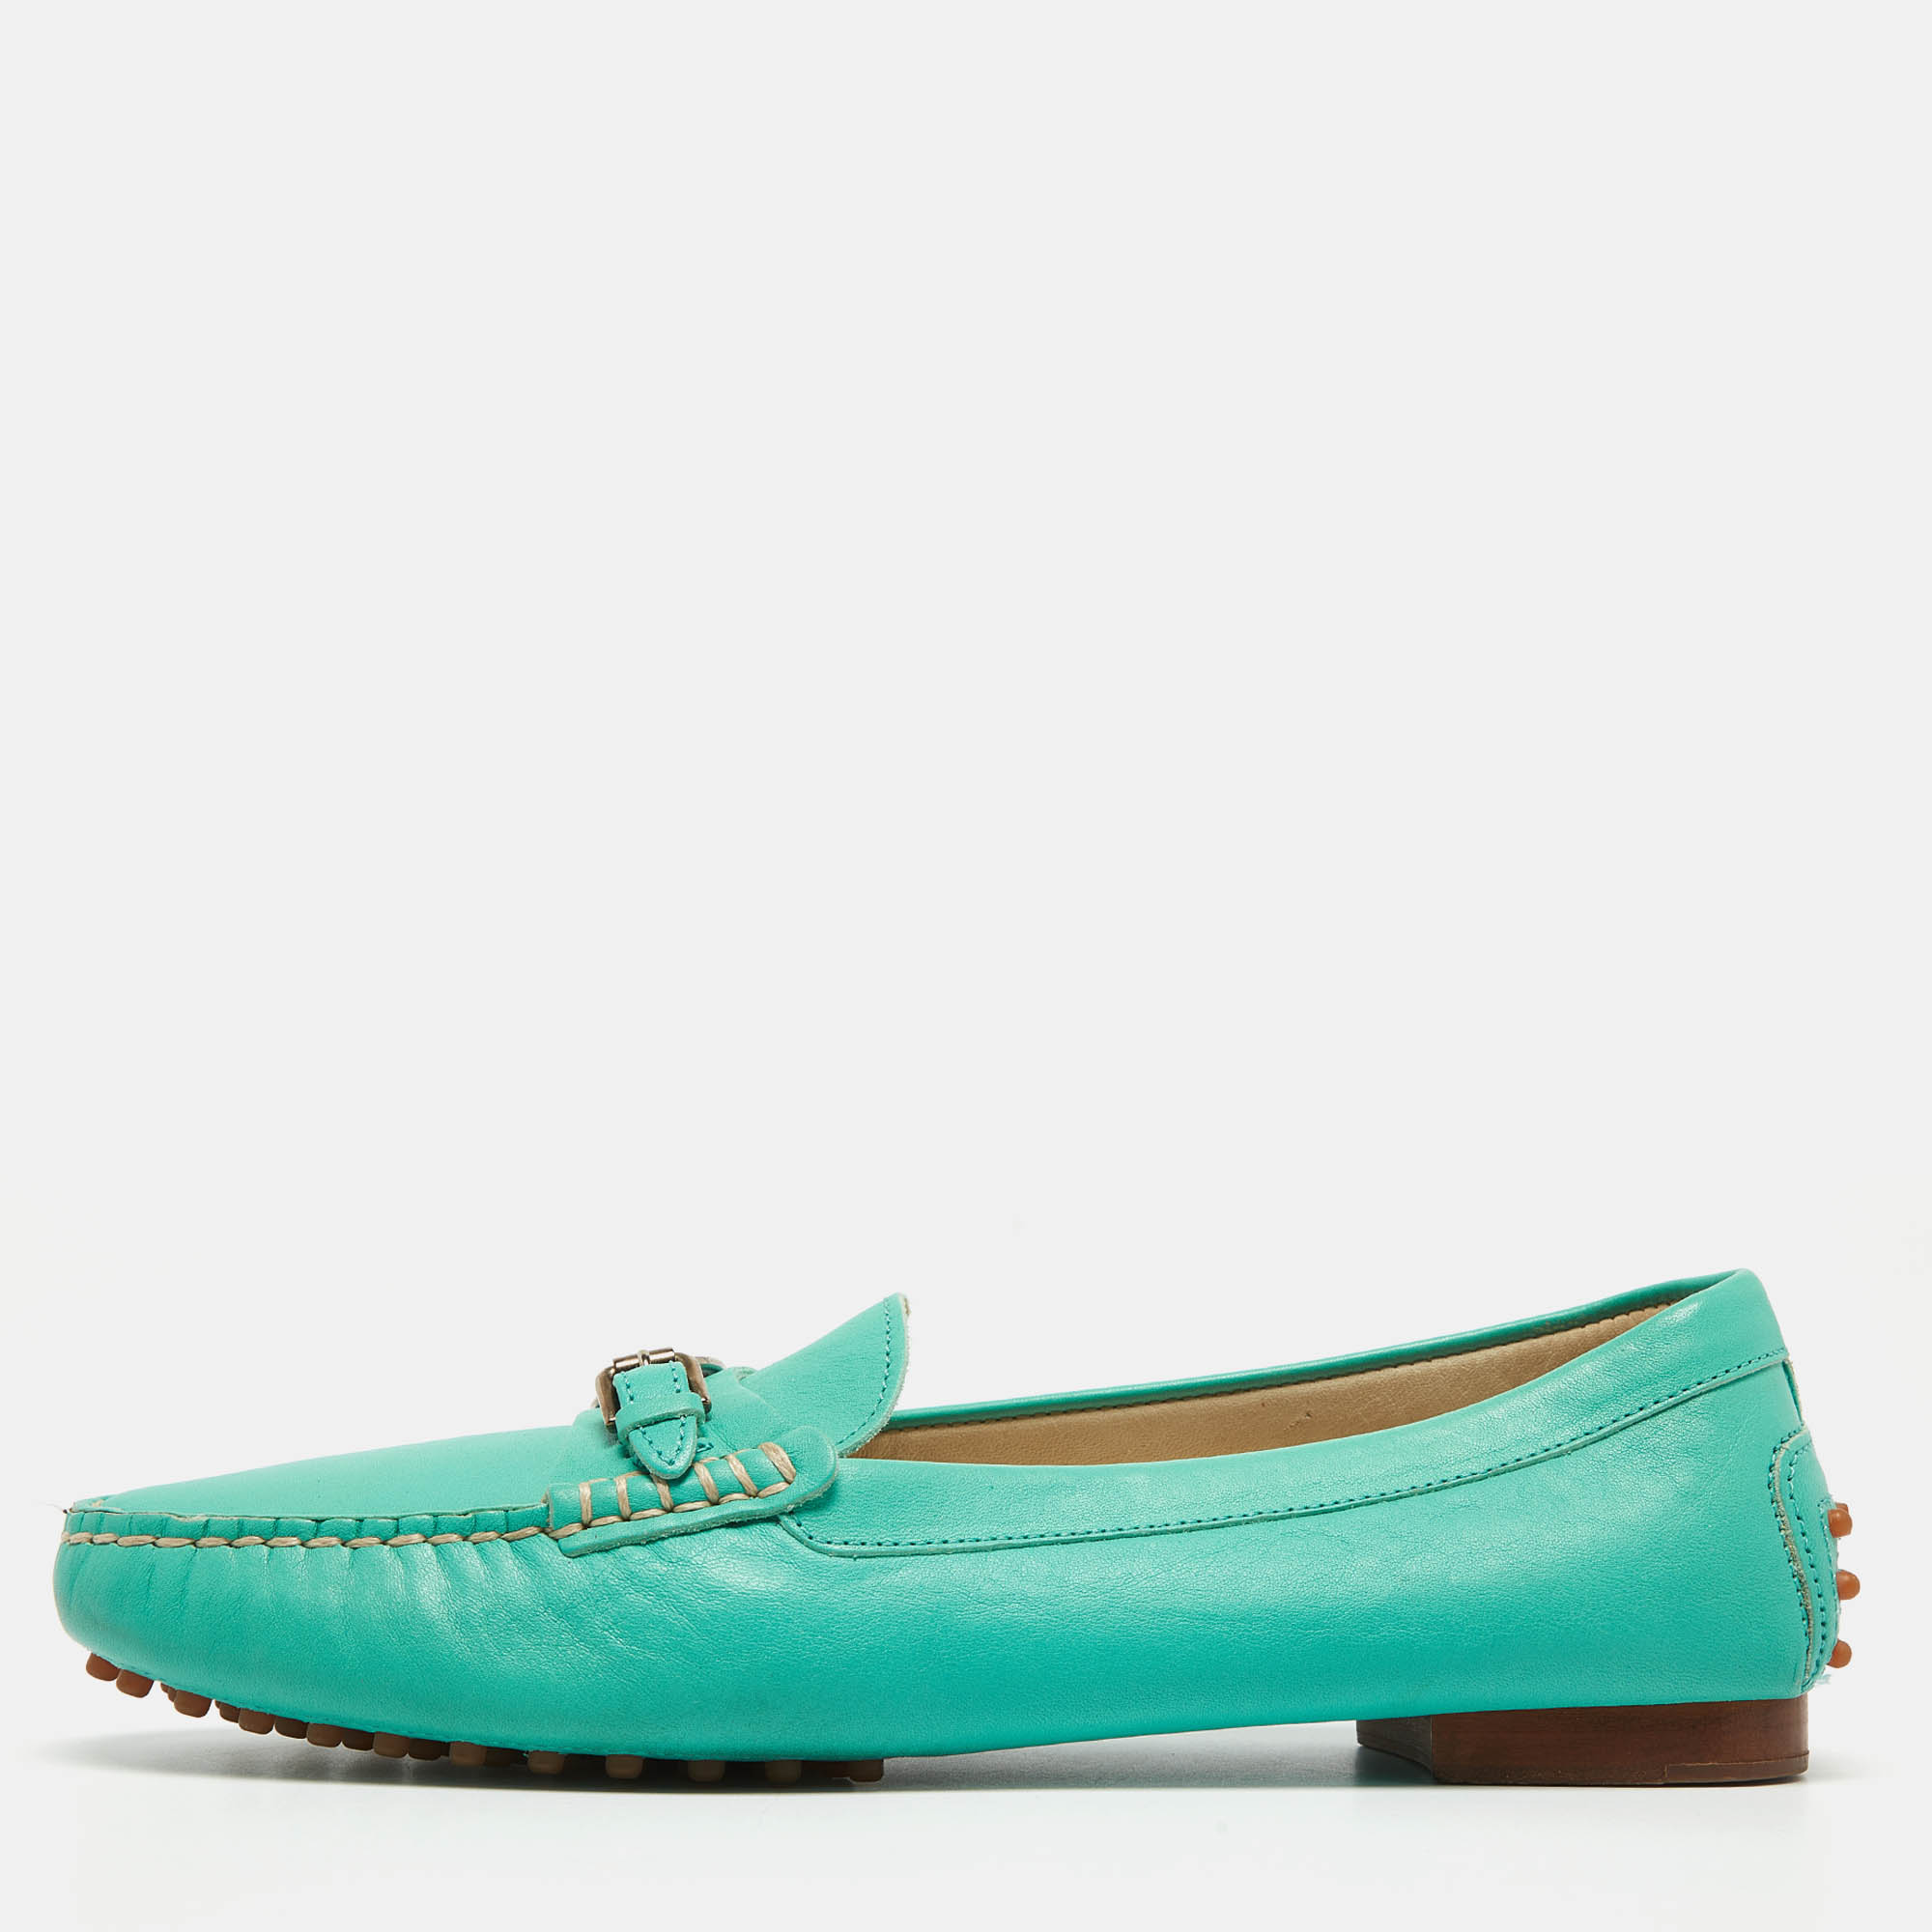 Ralph lauren collection tiffany blue  leather buckle loafers size 40